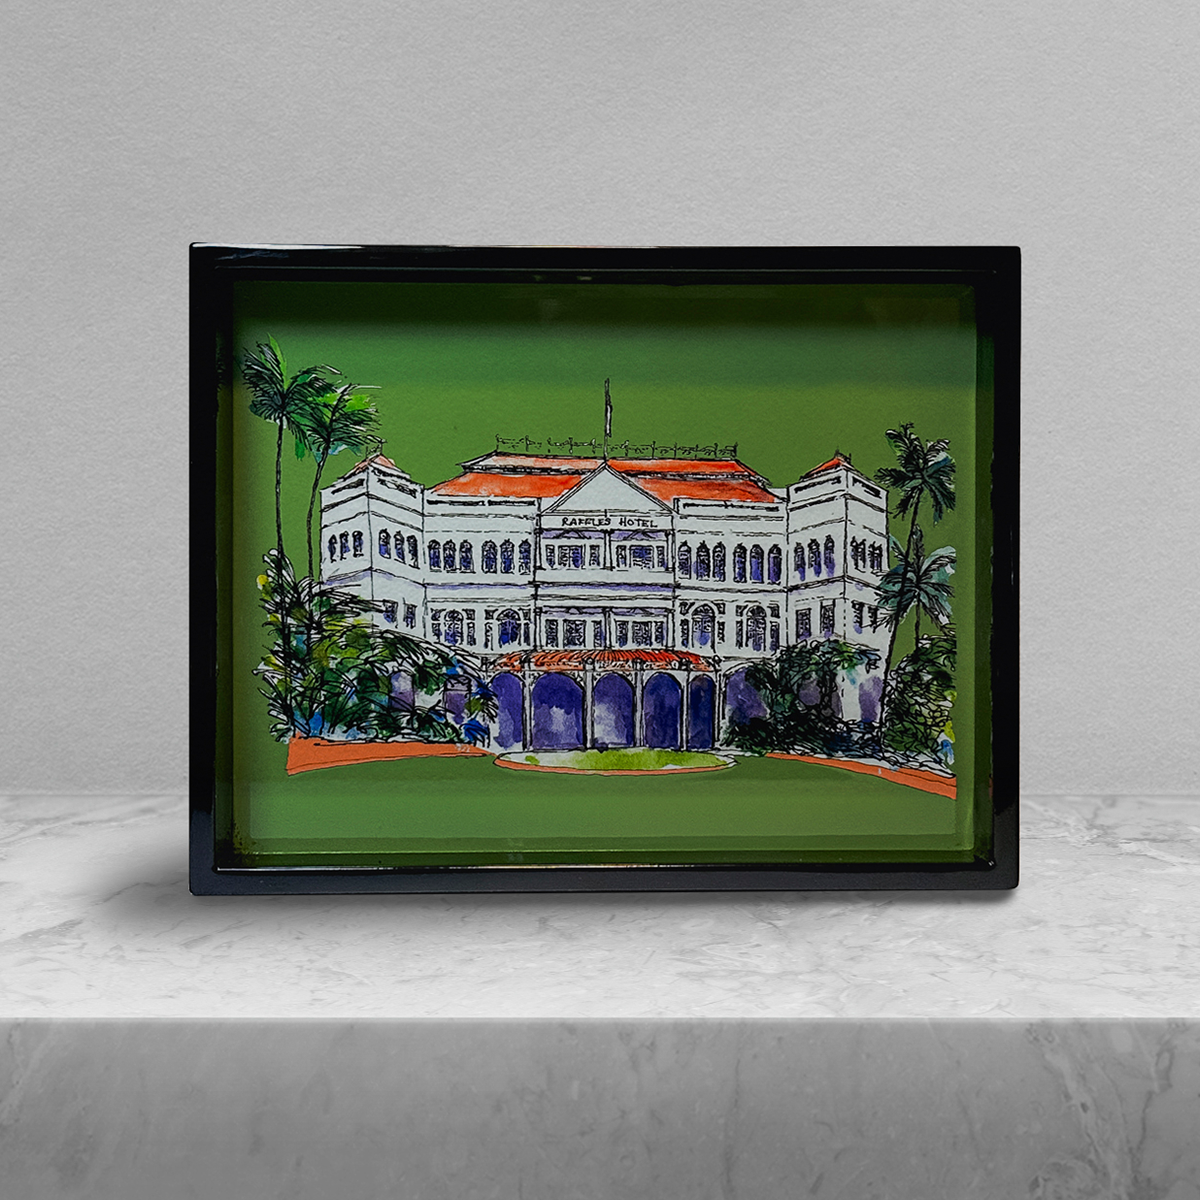 Singapore Themed Lacquer Trinket Tray - Raffles Hotel